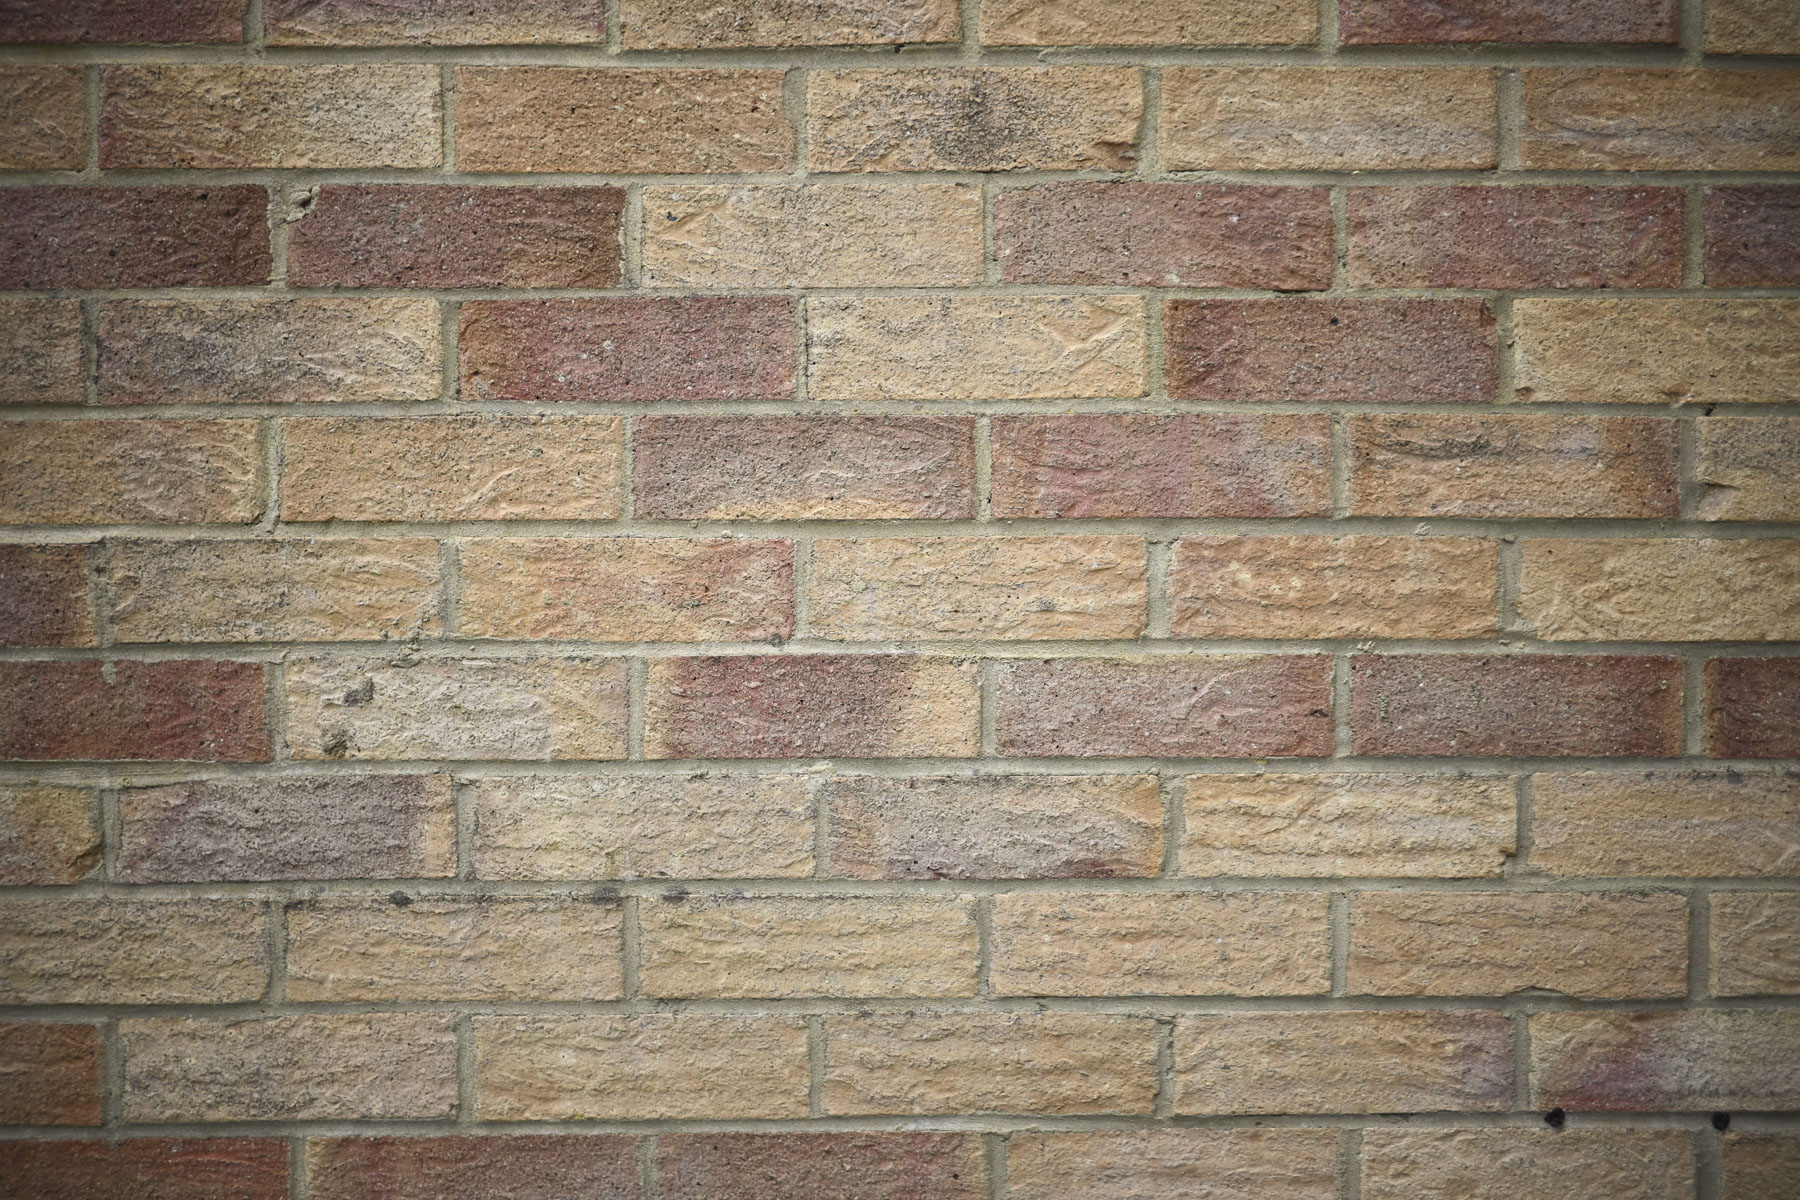 Image of a brick wall taken with the Nikkor Z DX 24mm f/1.7 lens to show vignetting